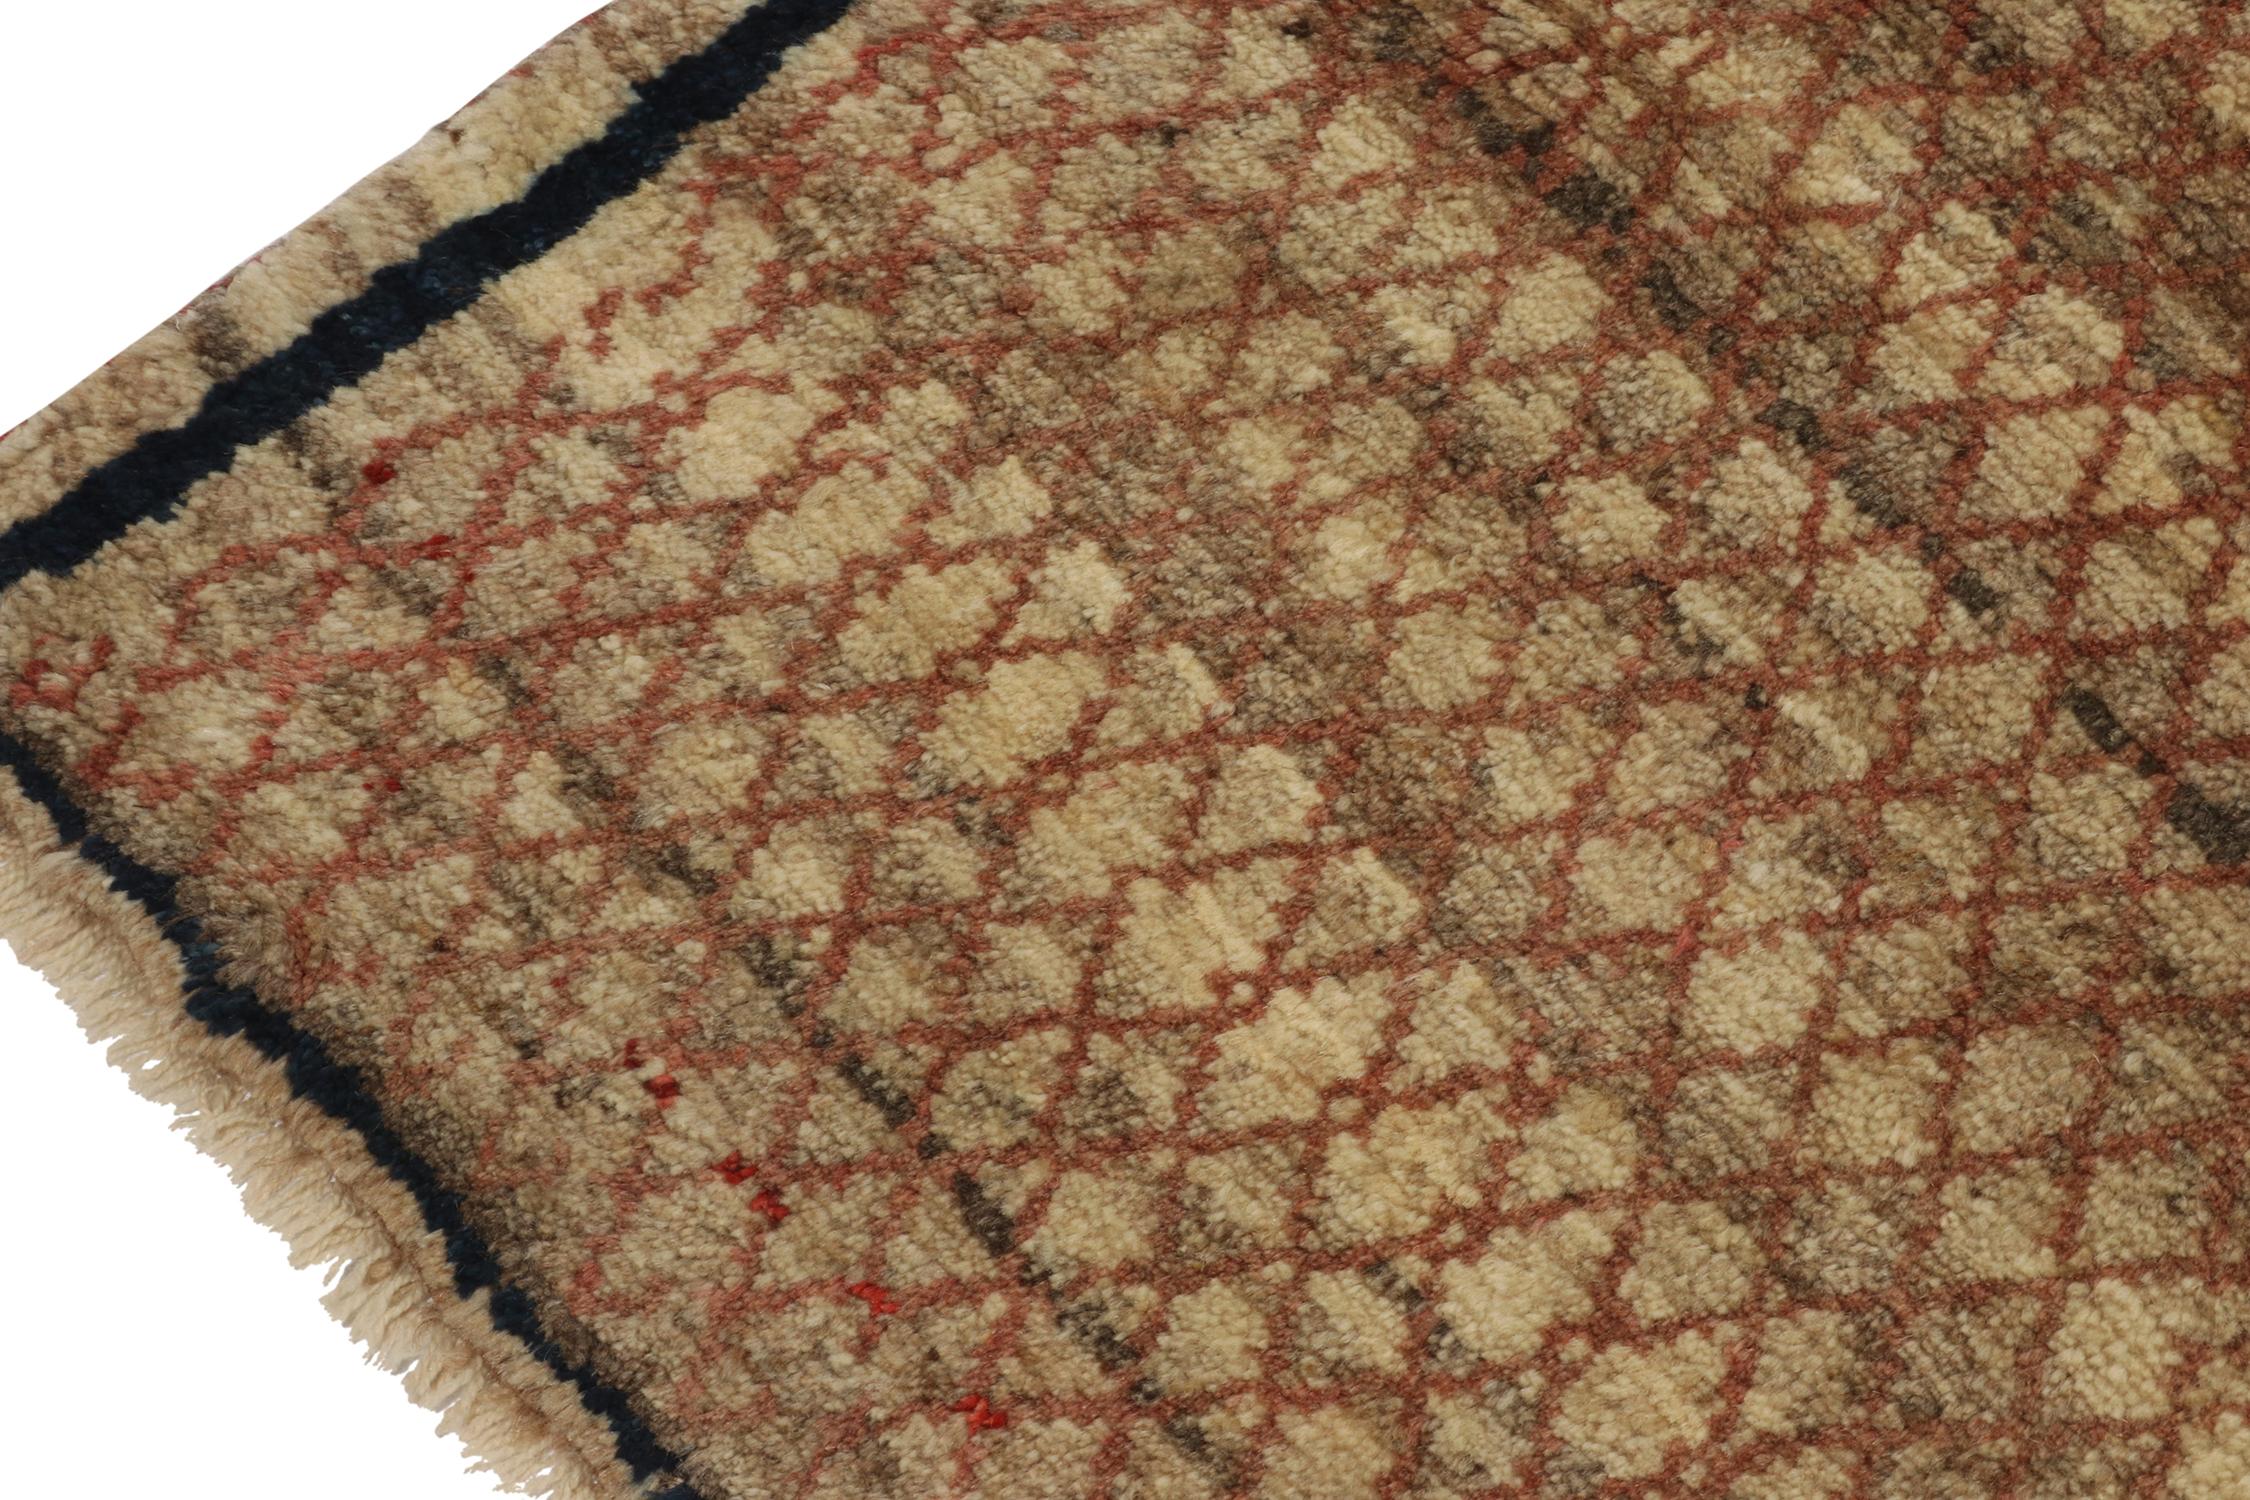 Vintage Gabbeh Tribal Rug in Beige-Brown with Red Lattice Pattern by Rug & Kilim In Good Condition For Sale In Long Island City, NY